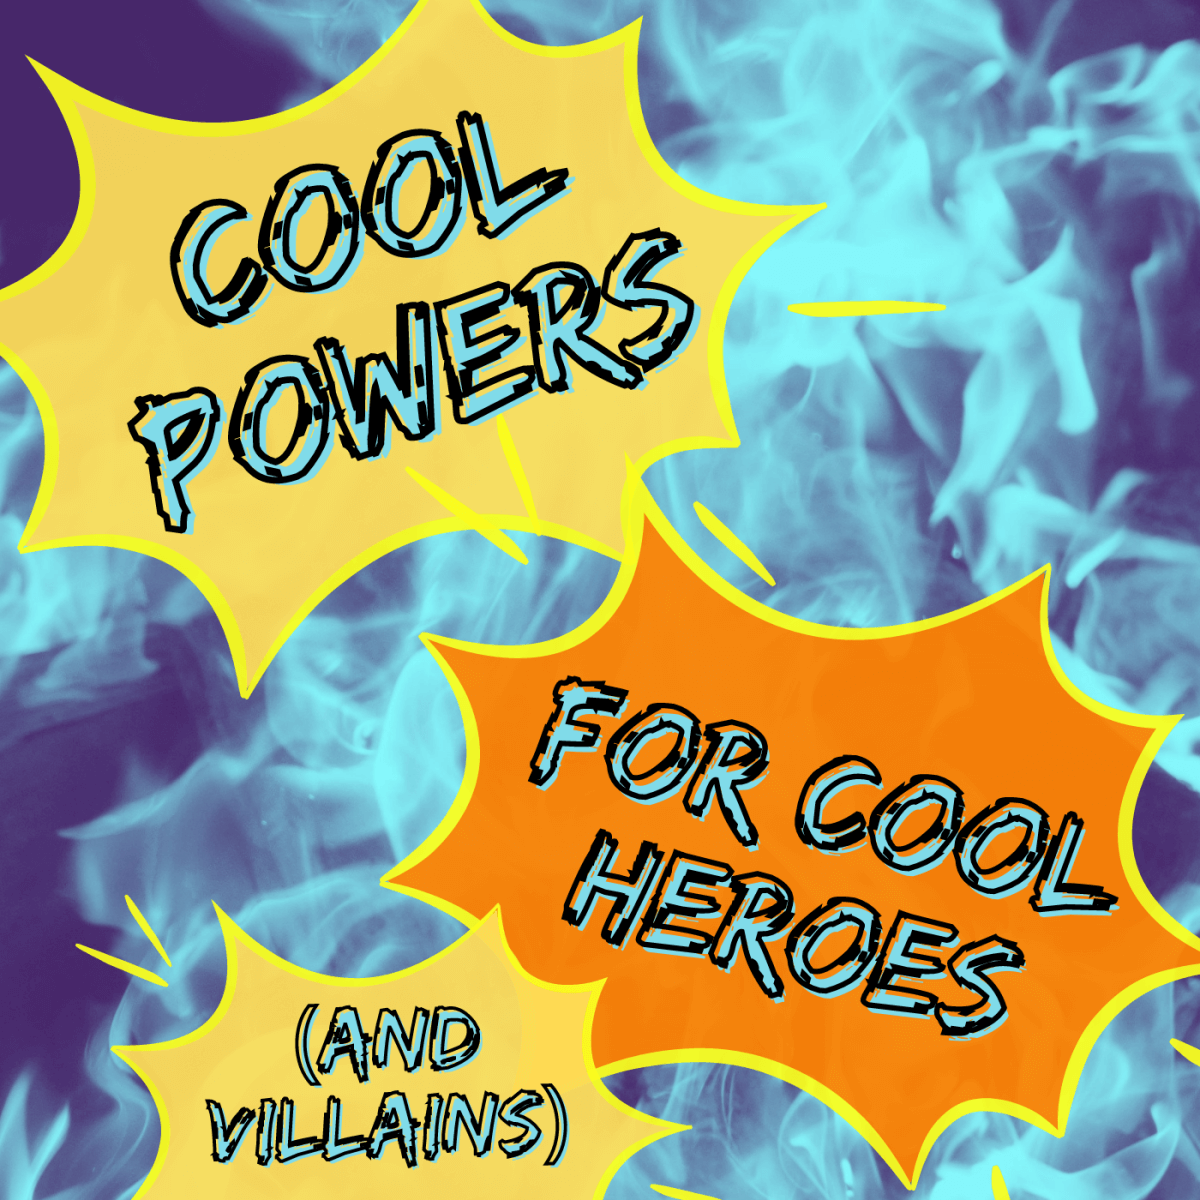 List of Superpowers: Cool Powers for Heroes (or Villains)